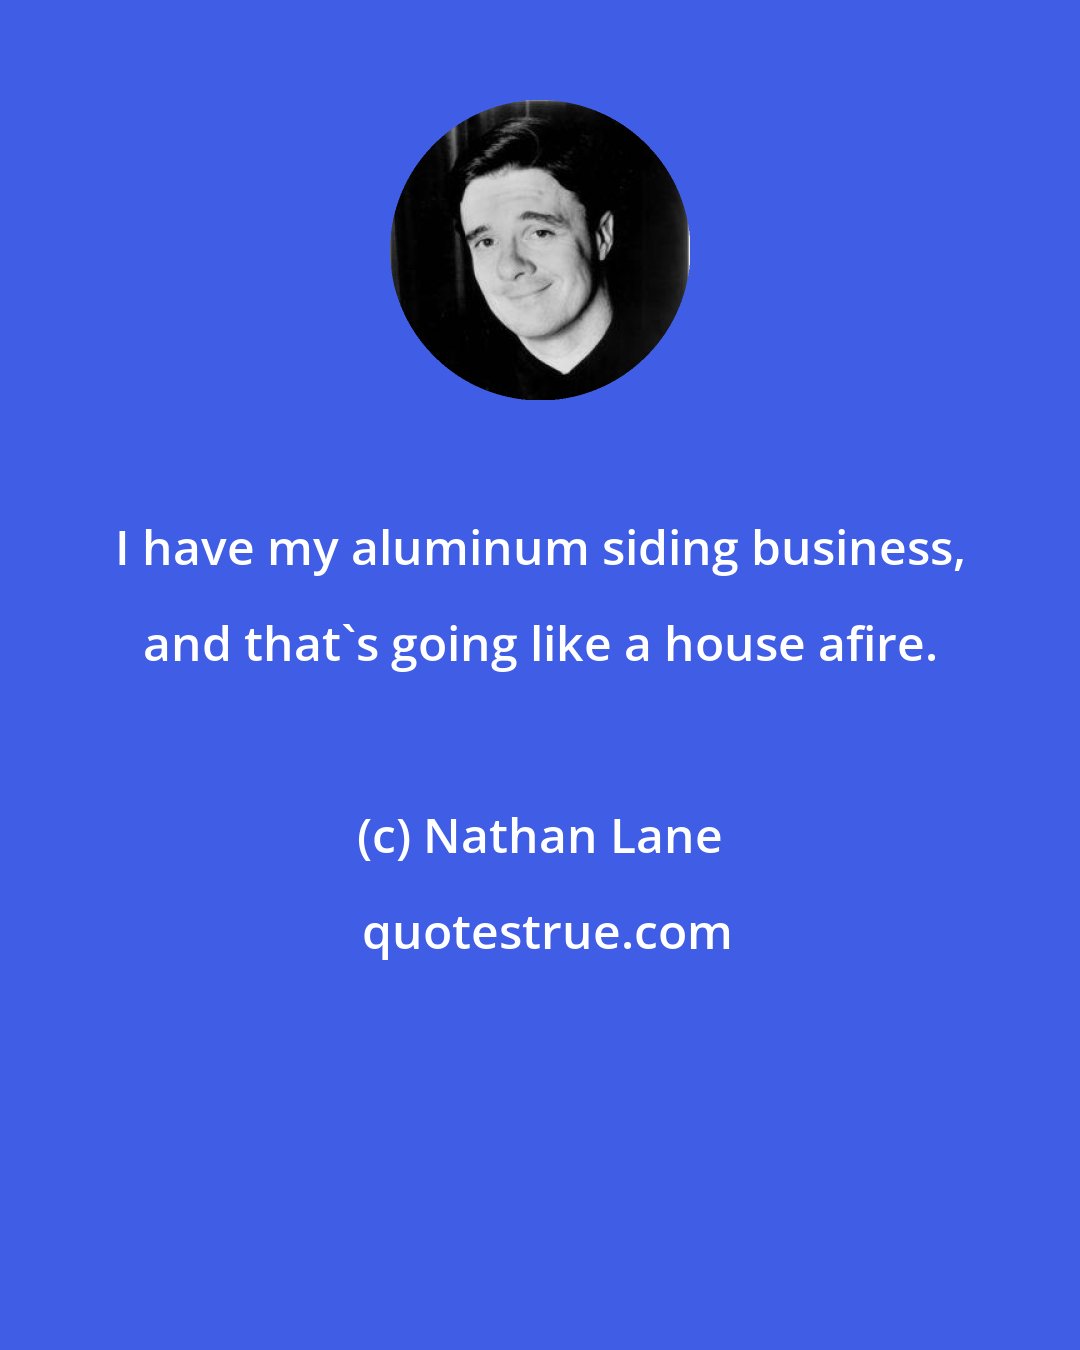 Nathan Lane: I have my aluminum siding business, and that's going like a house afire.